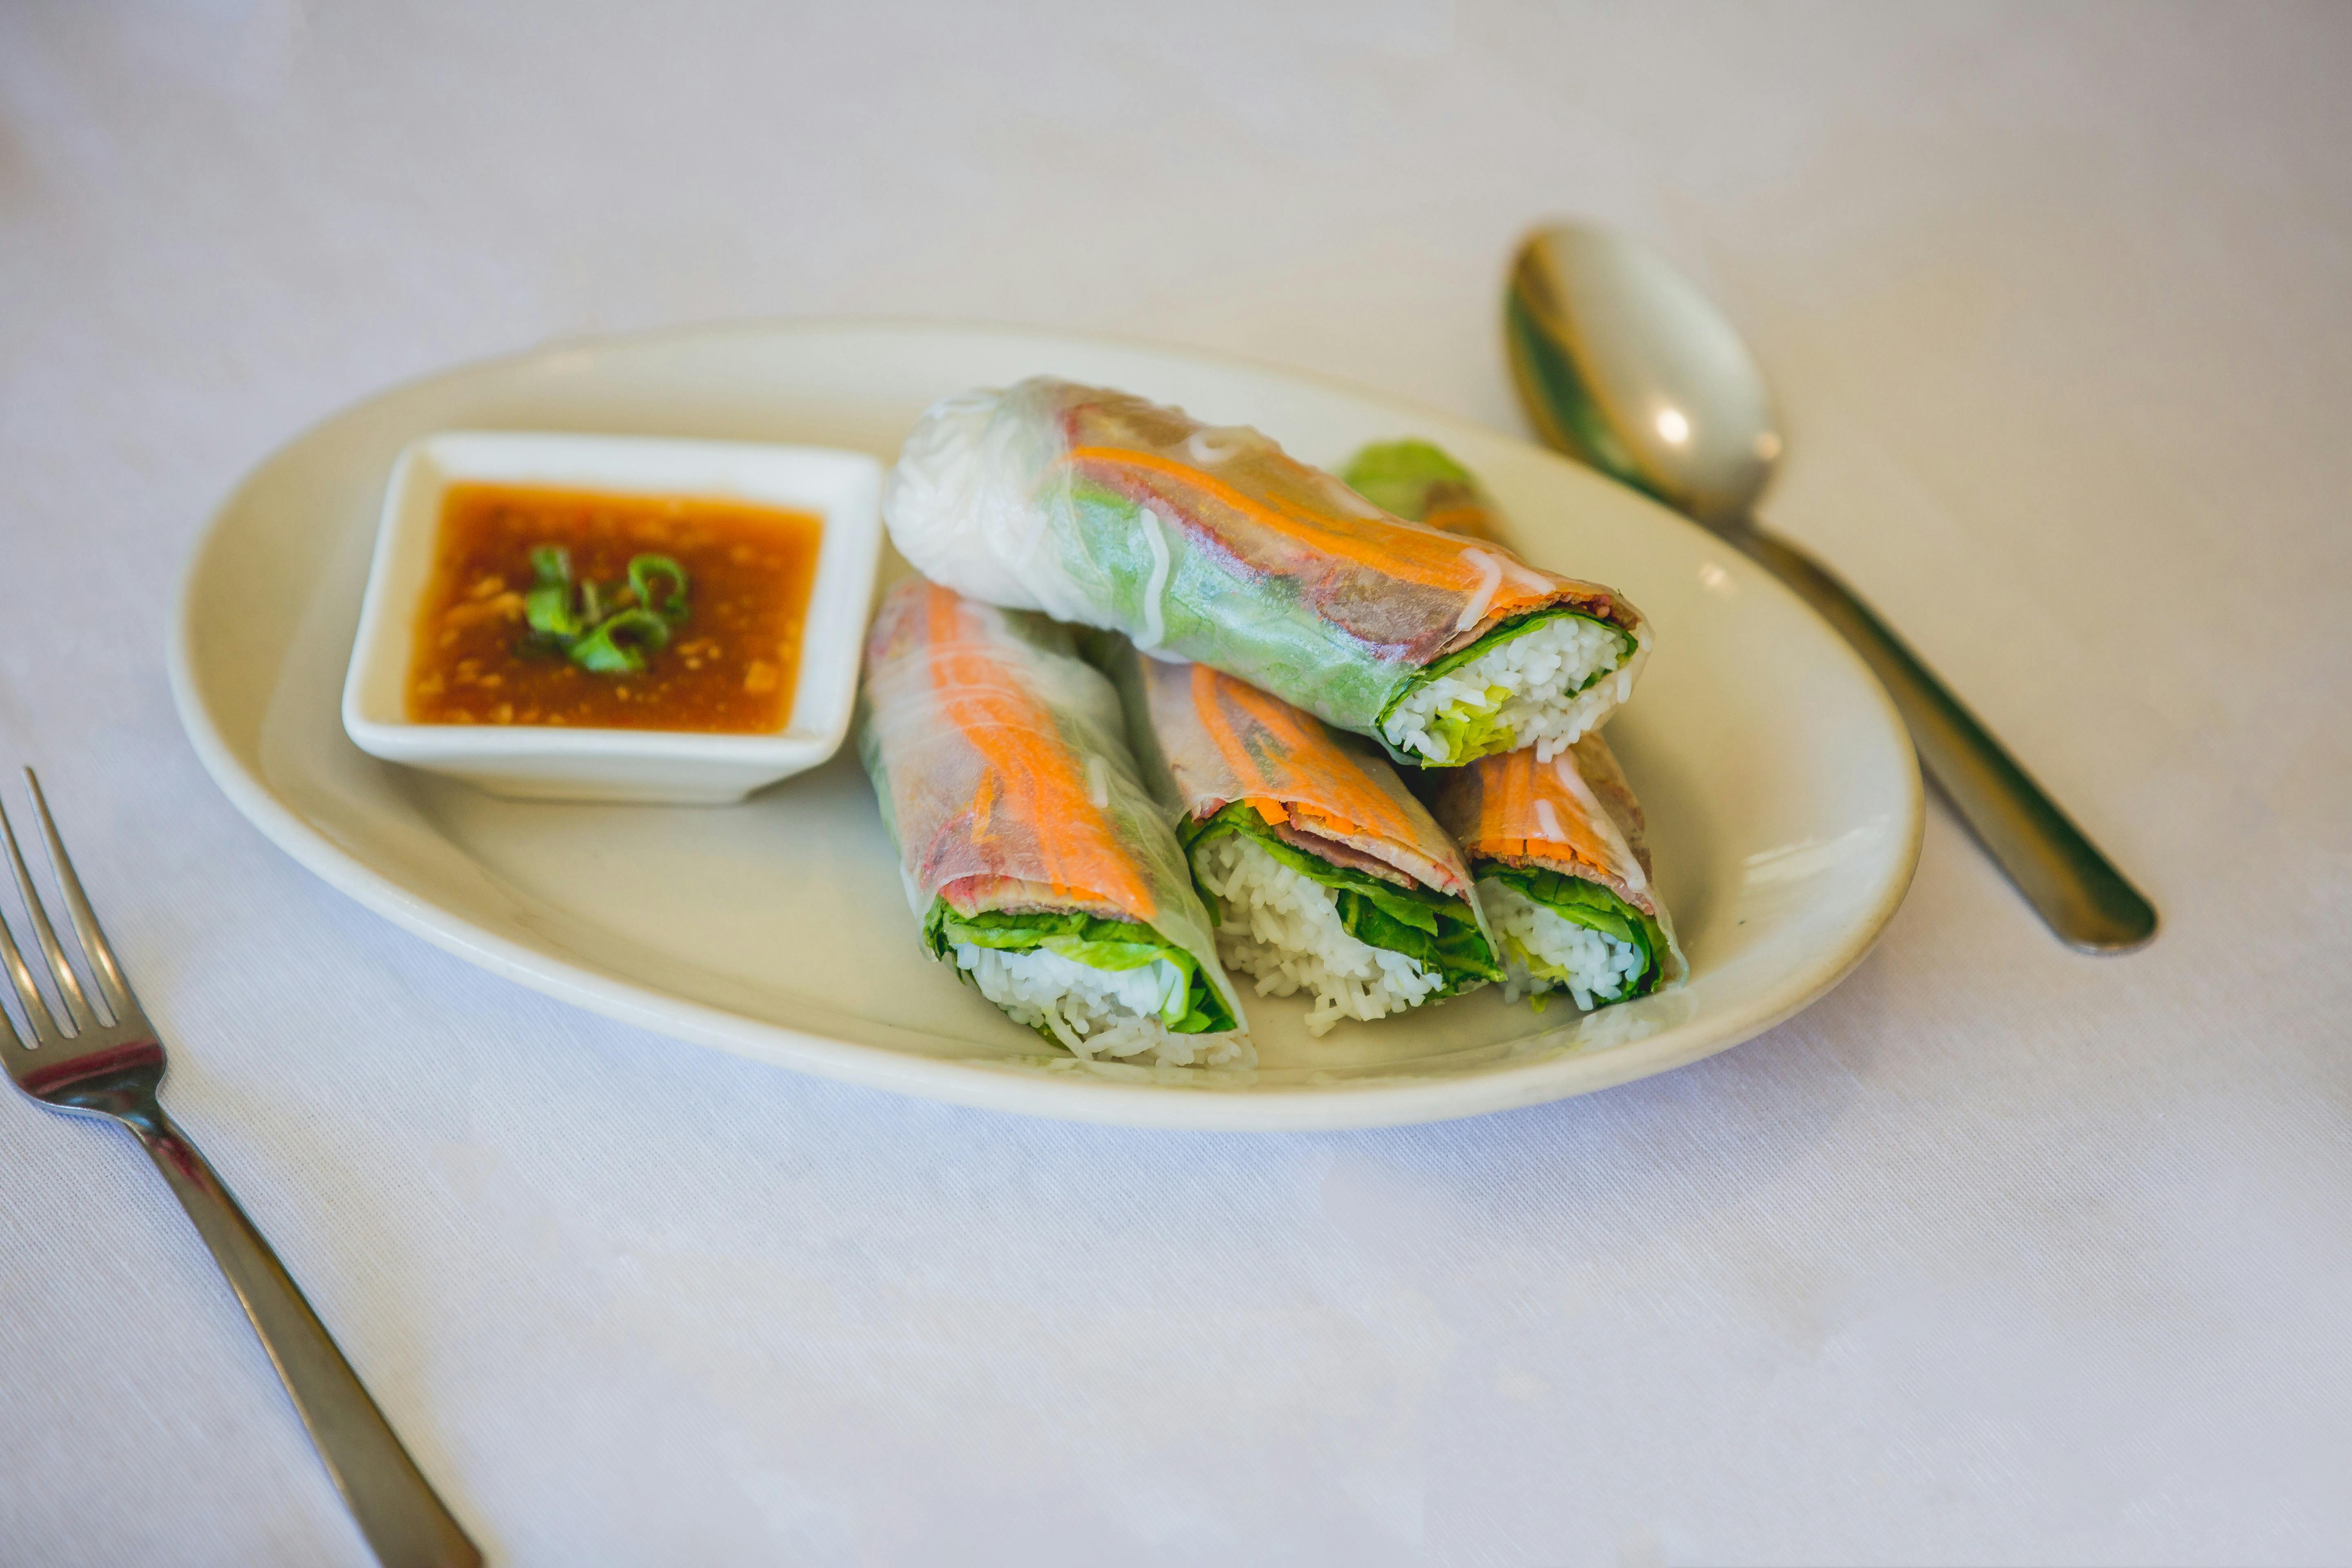 2. Spring Rolls (2) from Hmong's Golden Egg Roll in La Crosse, WI